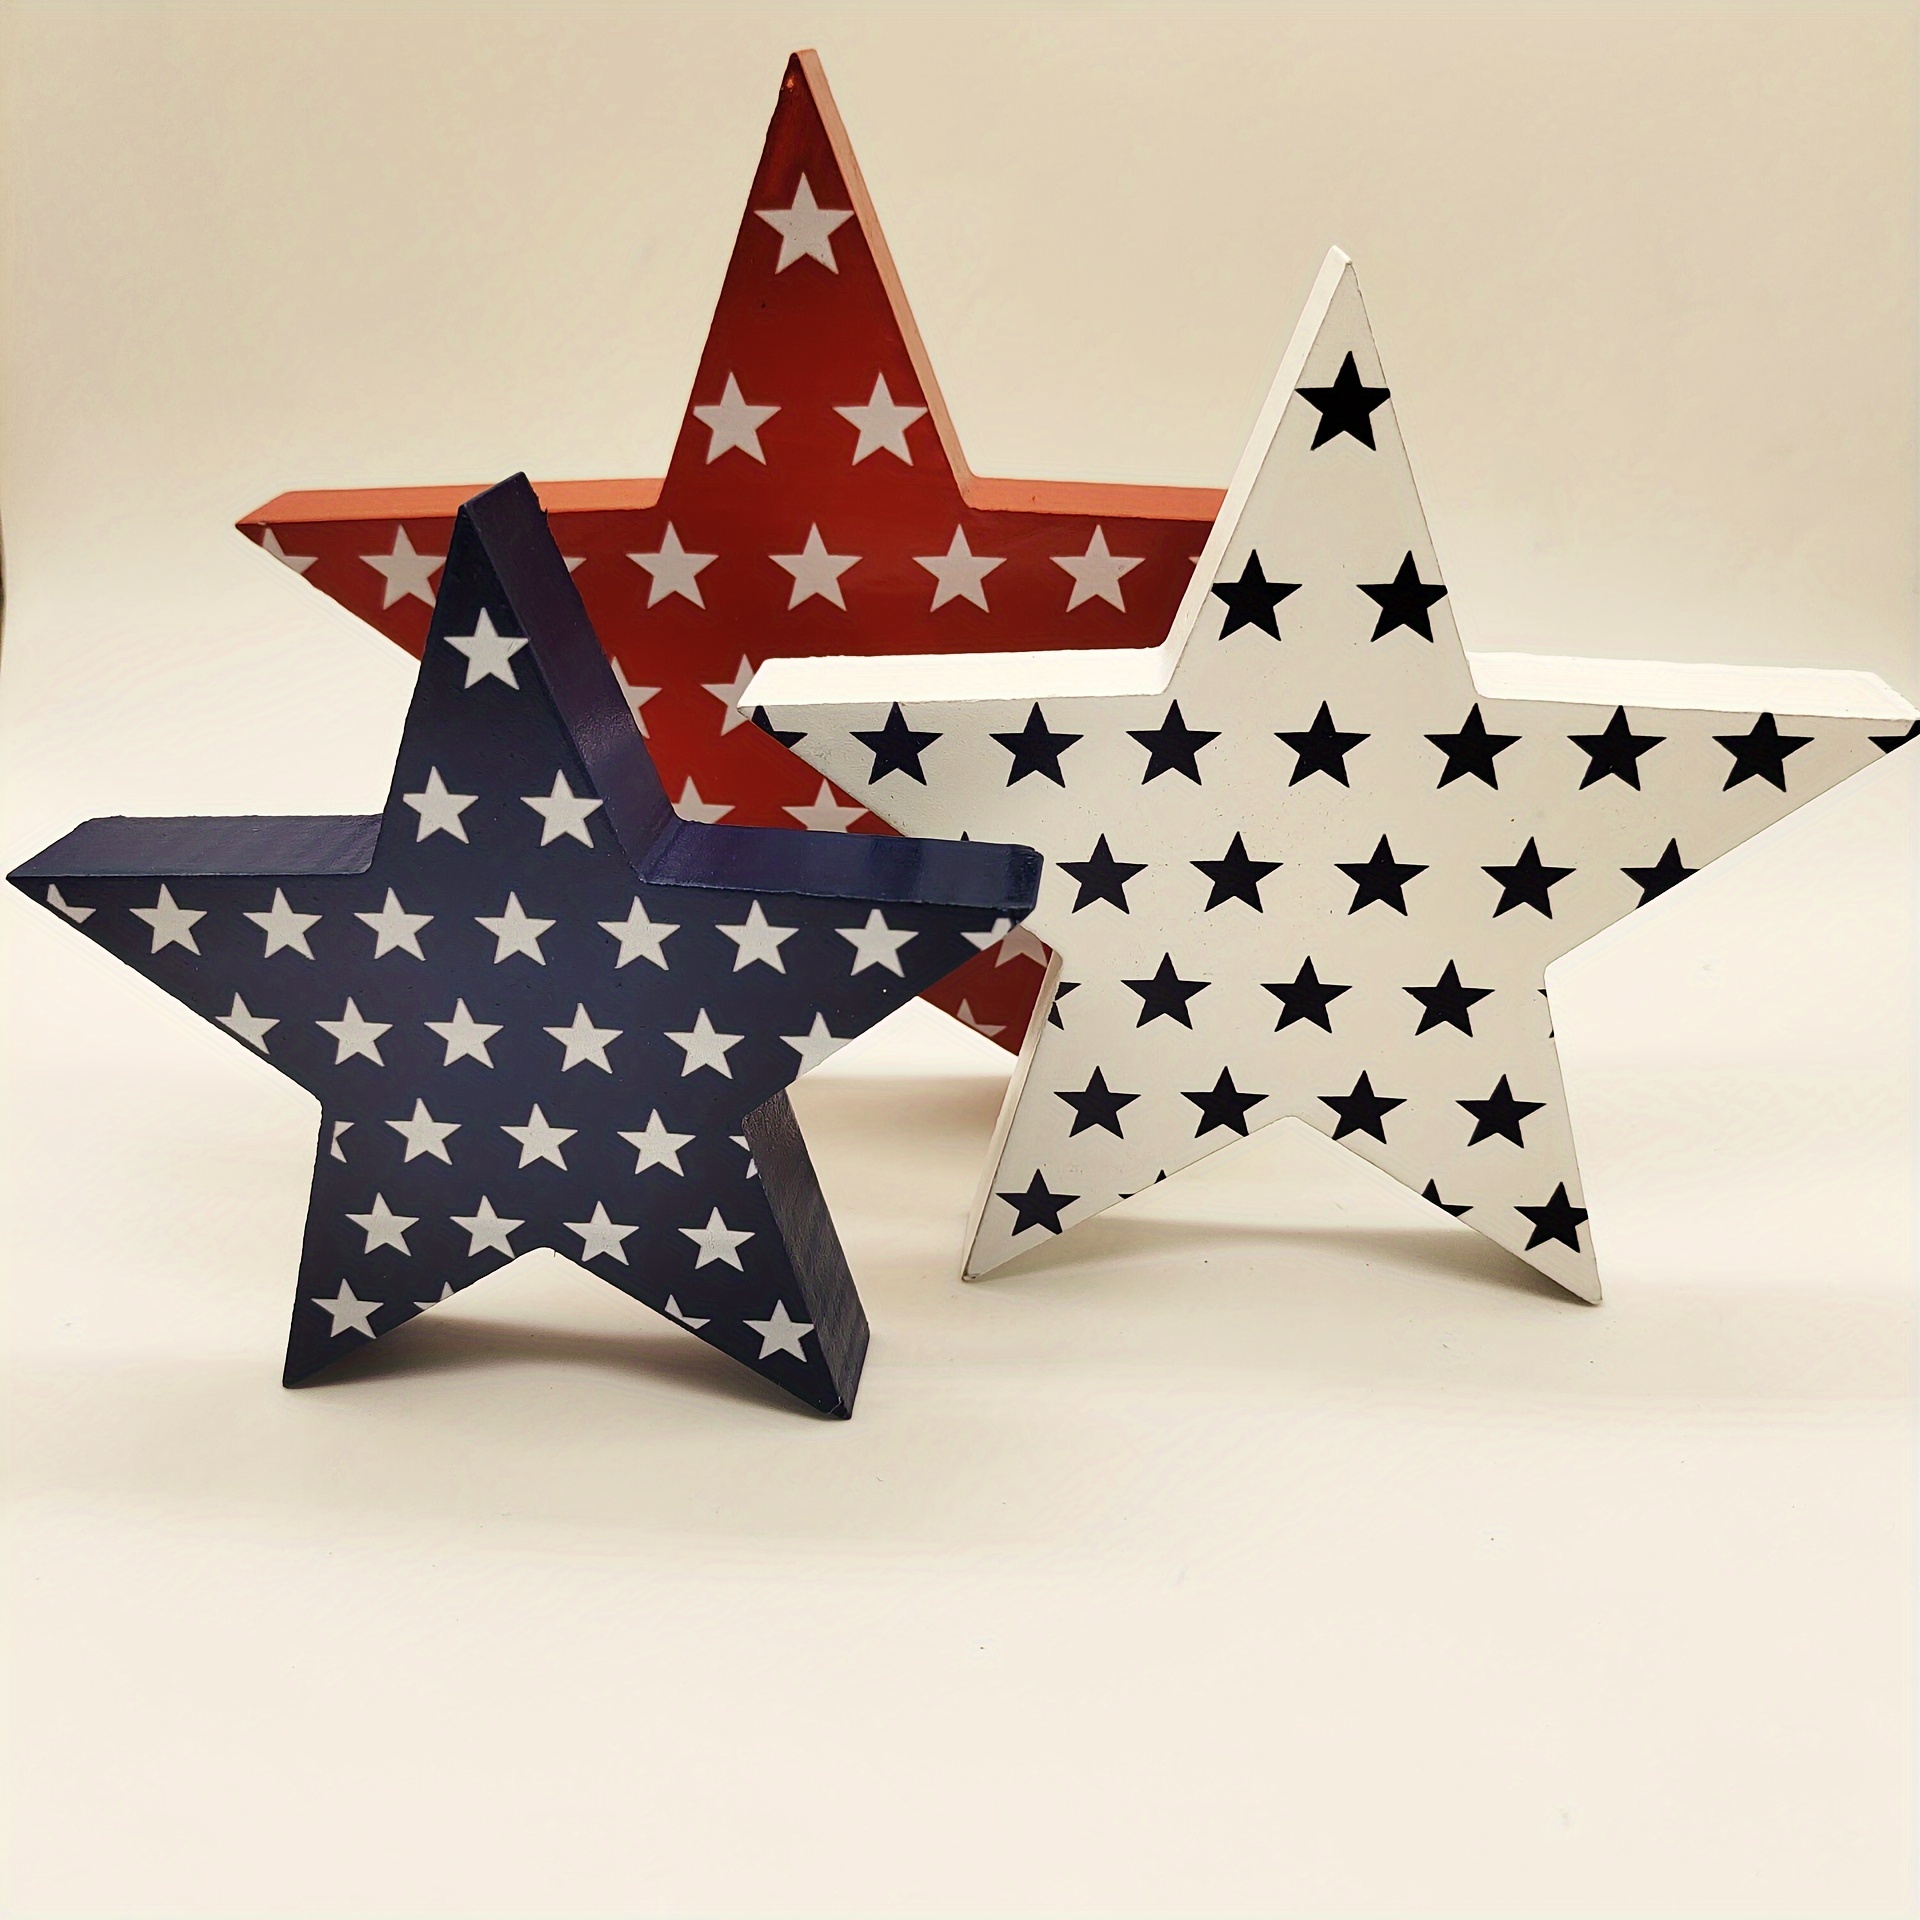 

3pcs/set Patriotic Wooden Star Decor, 4.33-5.9 Inches, Classic American Flag Style, Tabletop Decoration For 4th Of July Independence Day, Festive Home Accents